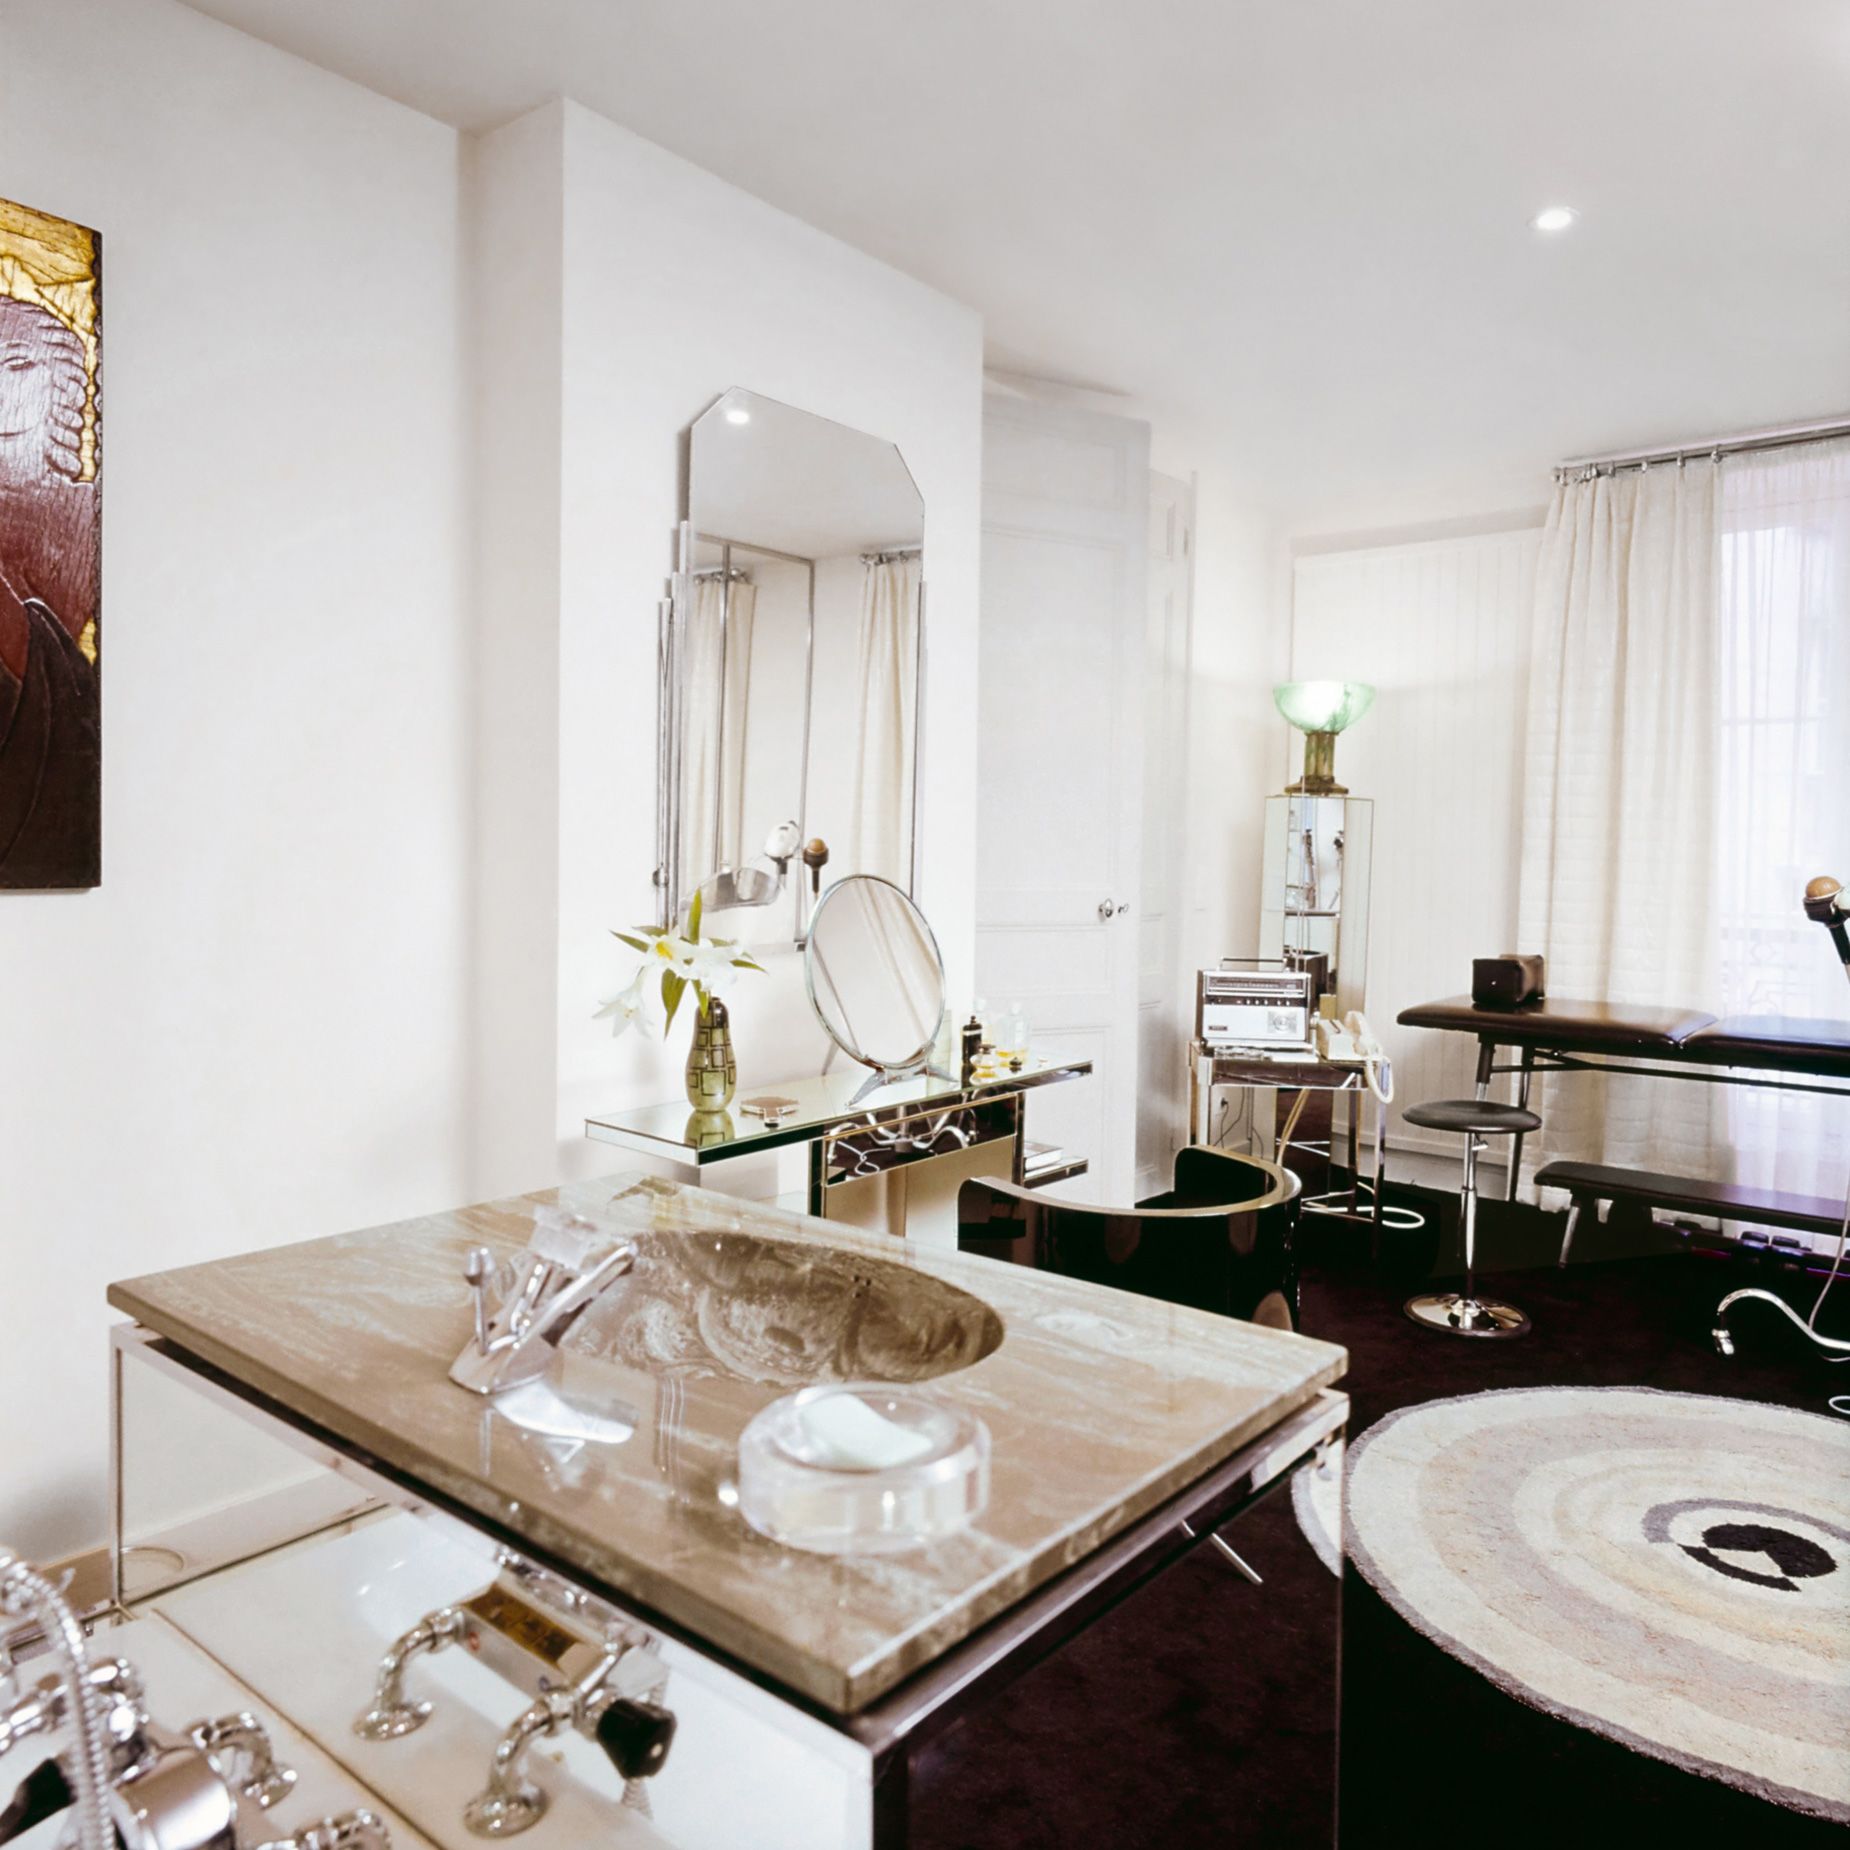 Lagerfeld designed the apartment's bathroom himself, focused on the balance of mirror and grey marble.